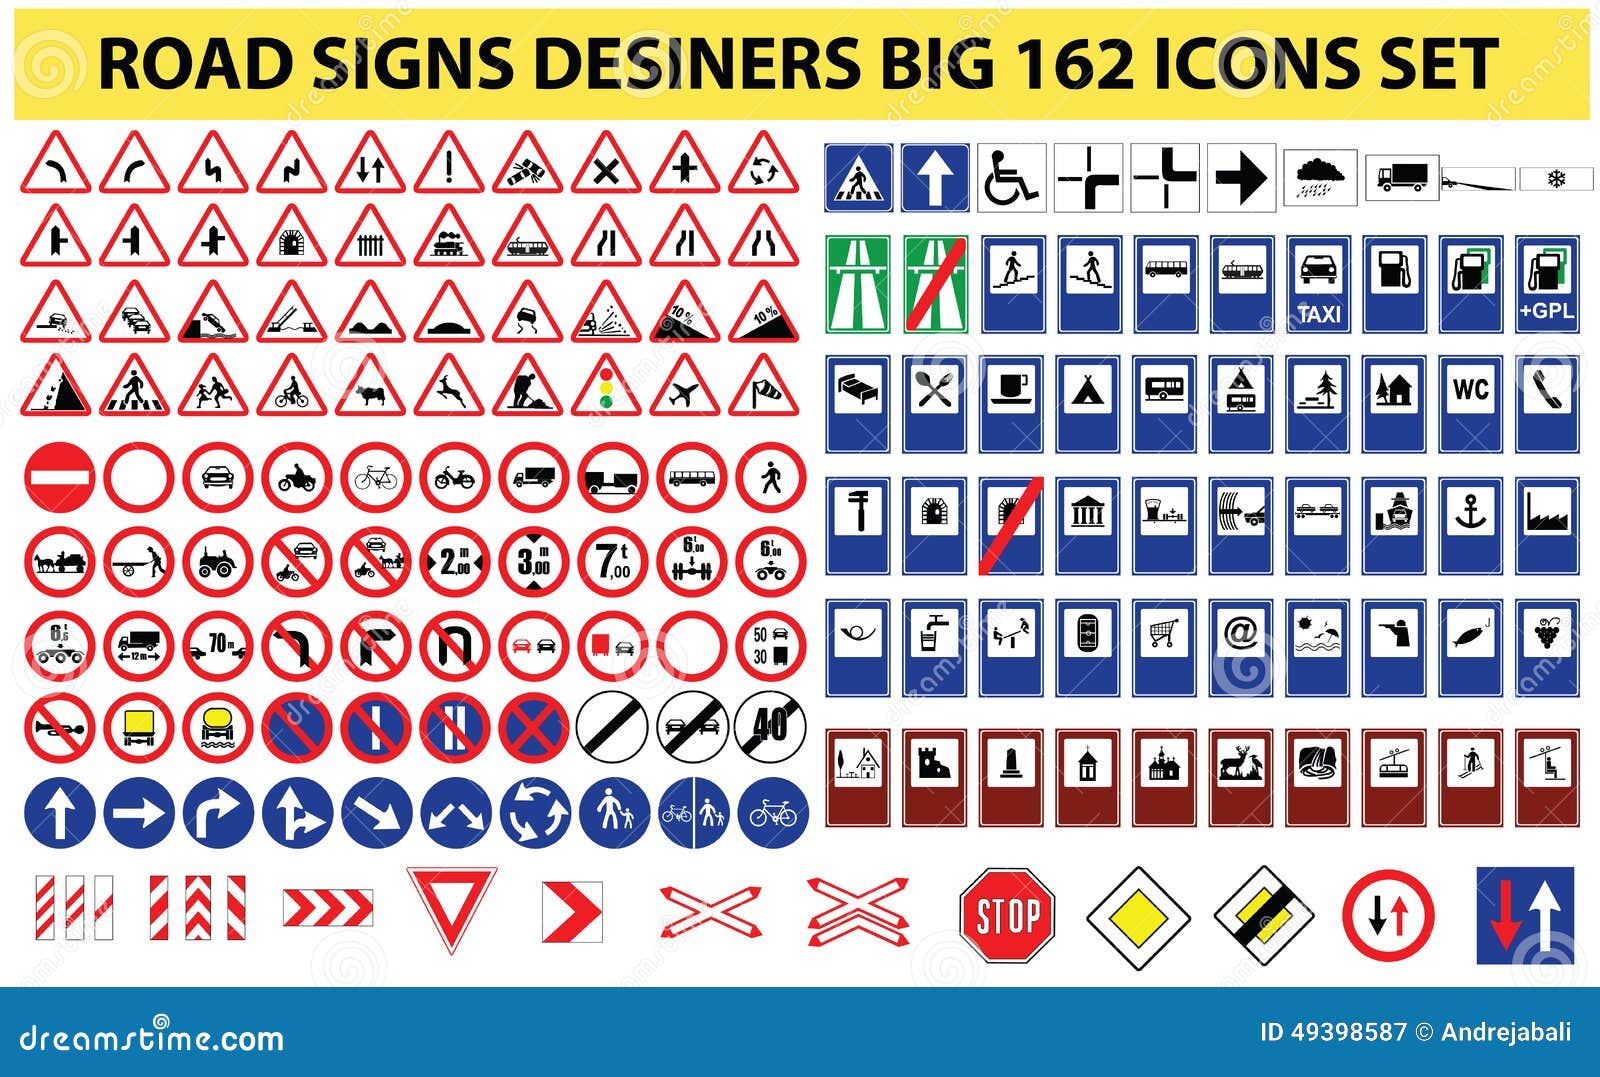 universal set of 162 road signs